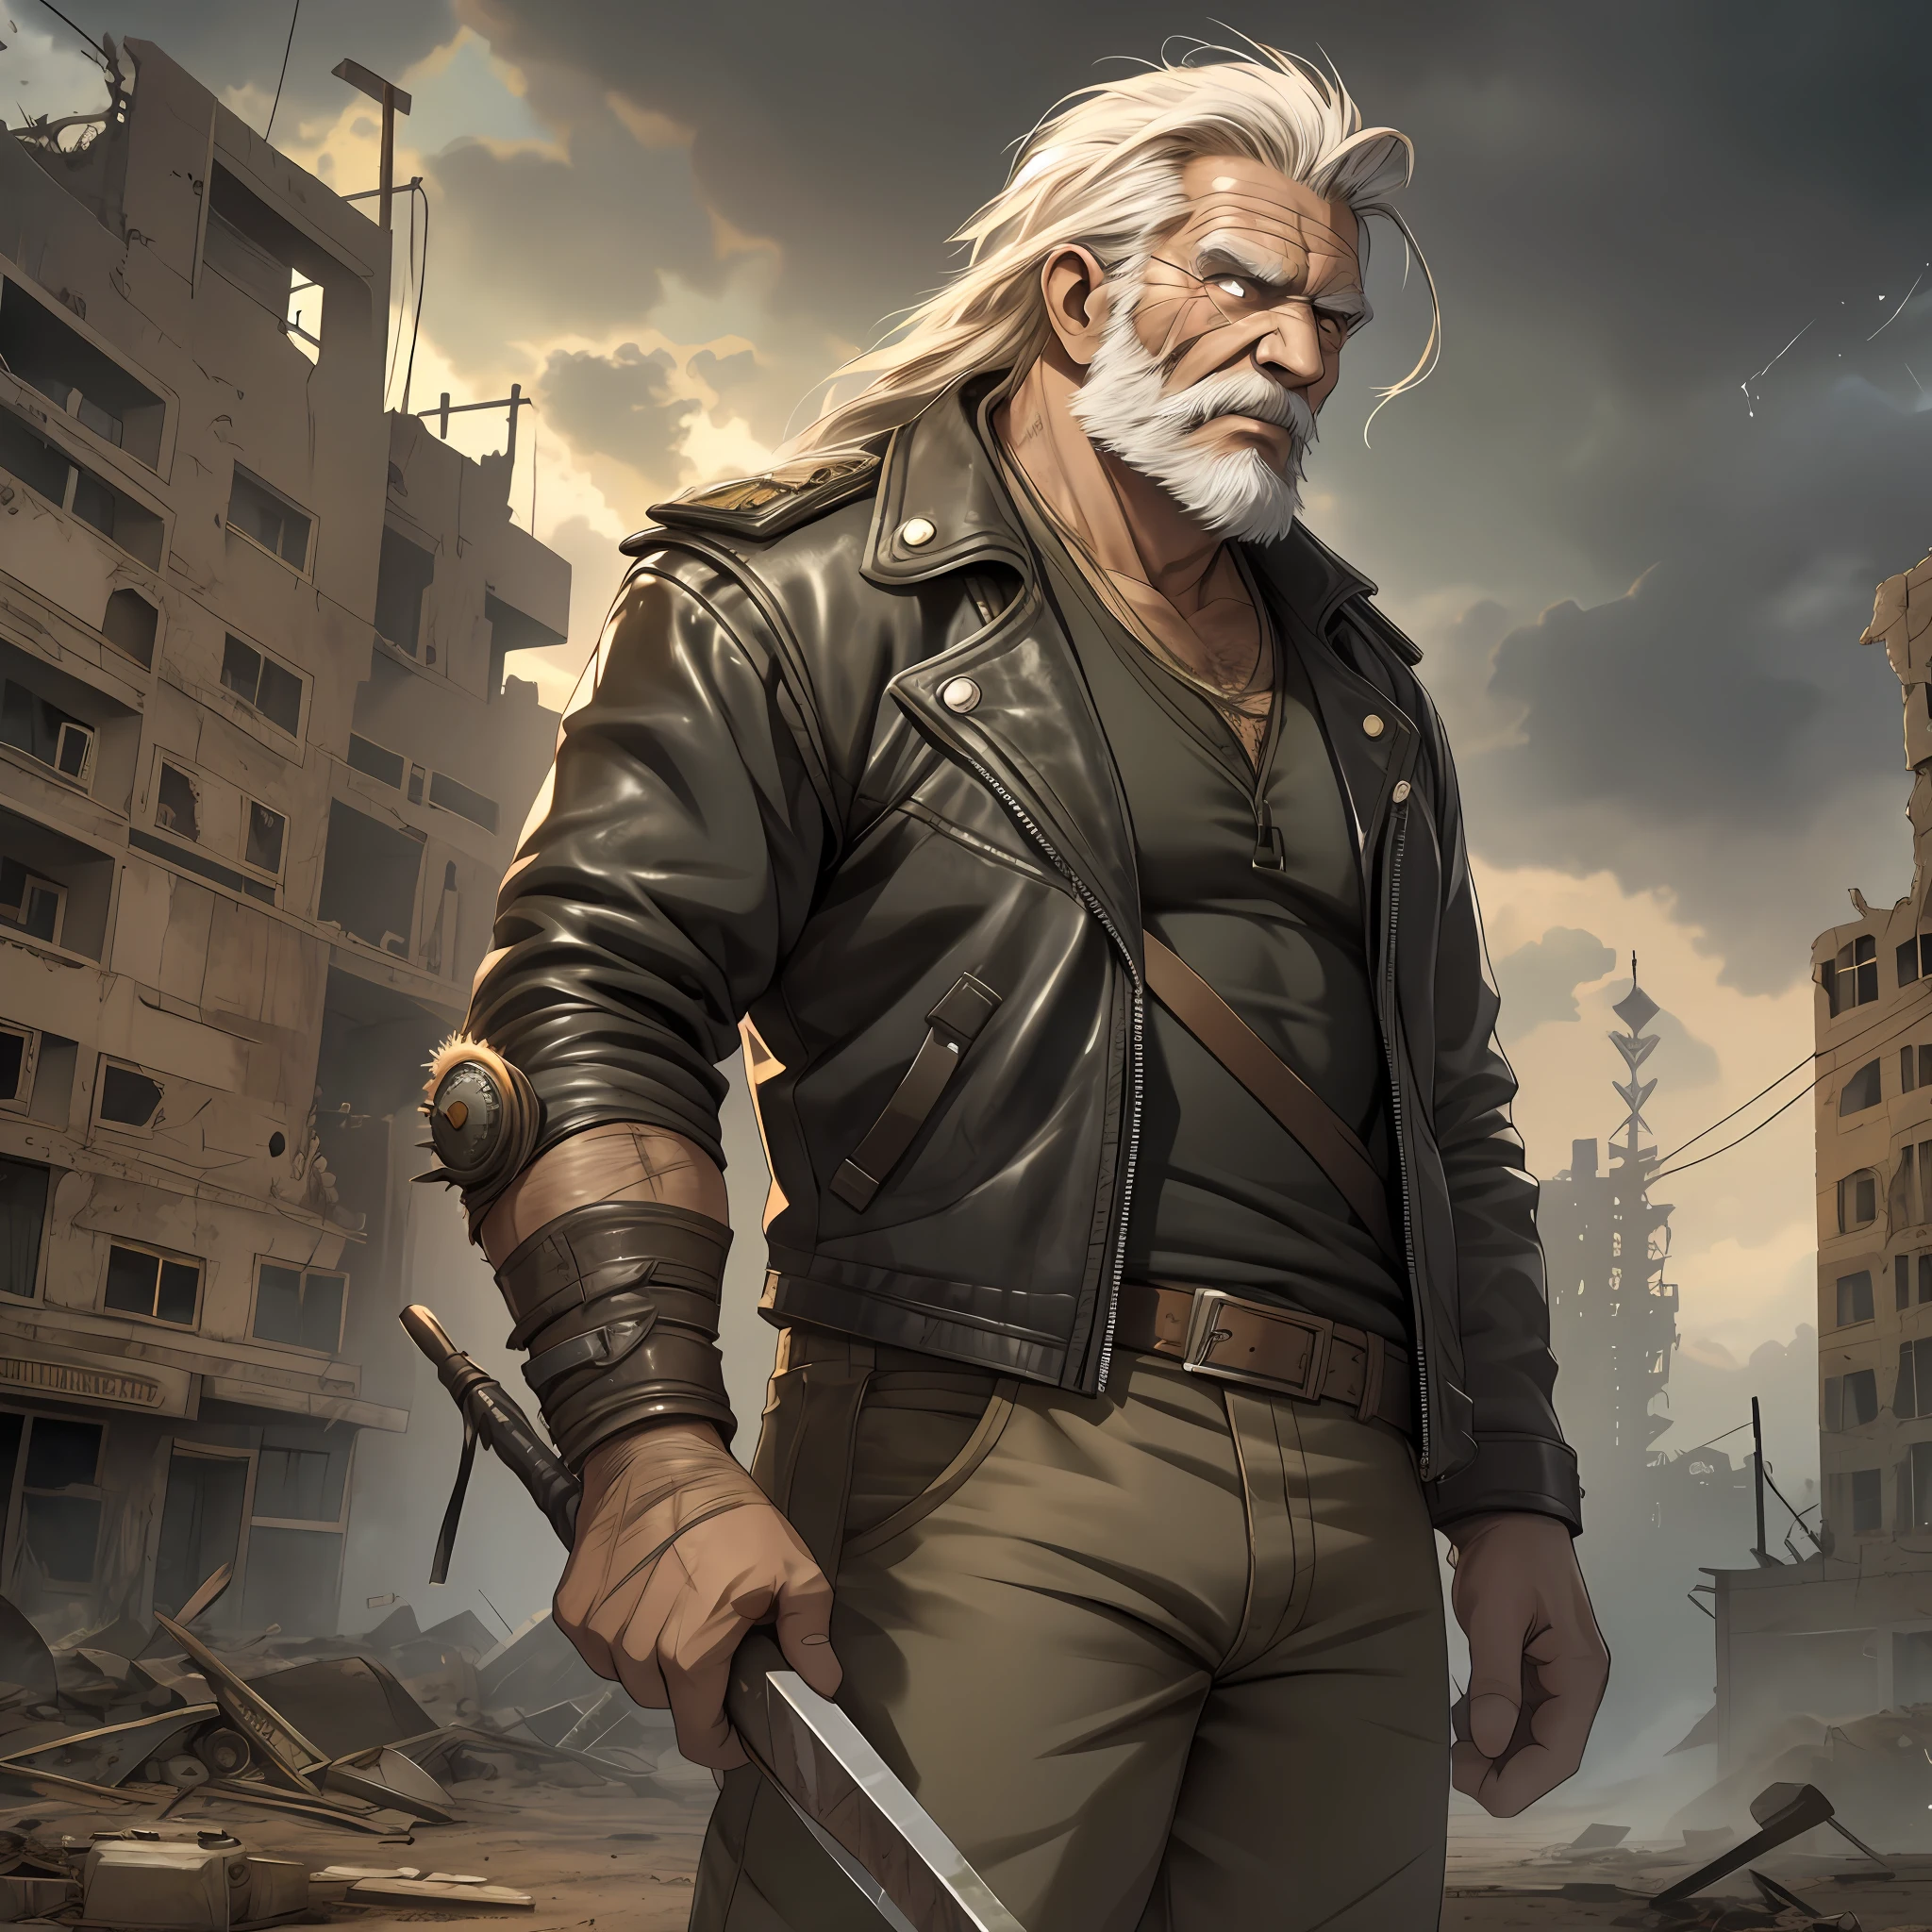 Create an image of a post-apocalyptic wasteland with a muscular old man as the central character. The old man is wearing a leather jacket and is holding a heavy metal weapon, such as a sledgehammer or a spiked club. His face is weathered with age and battle scars, and his hair is long and unkempt. In the background, there are ruins of a city that has been destroyed by war and natural disasters. The sky is dark with storm clouds, and there are signs of radiation damage in the landscape. The old man is standing in a pose that exudes strength and resilience, ready to defend himself against any threat that comes his way